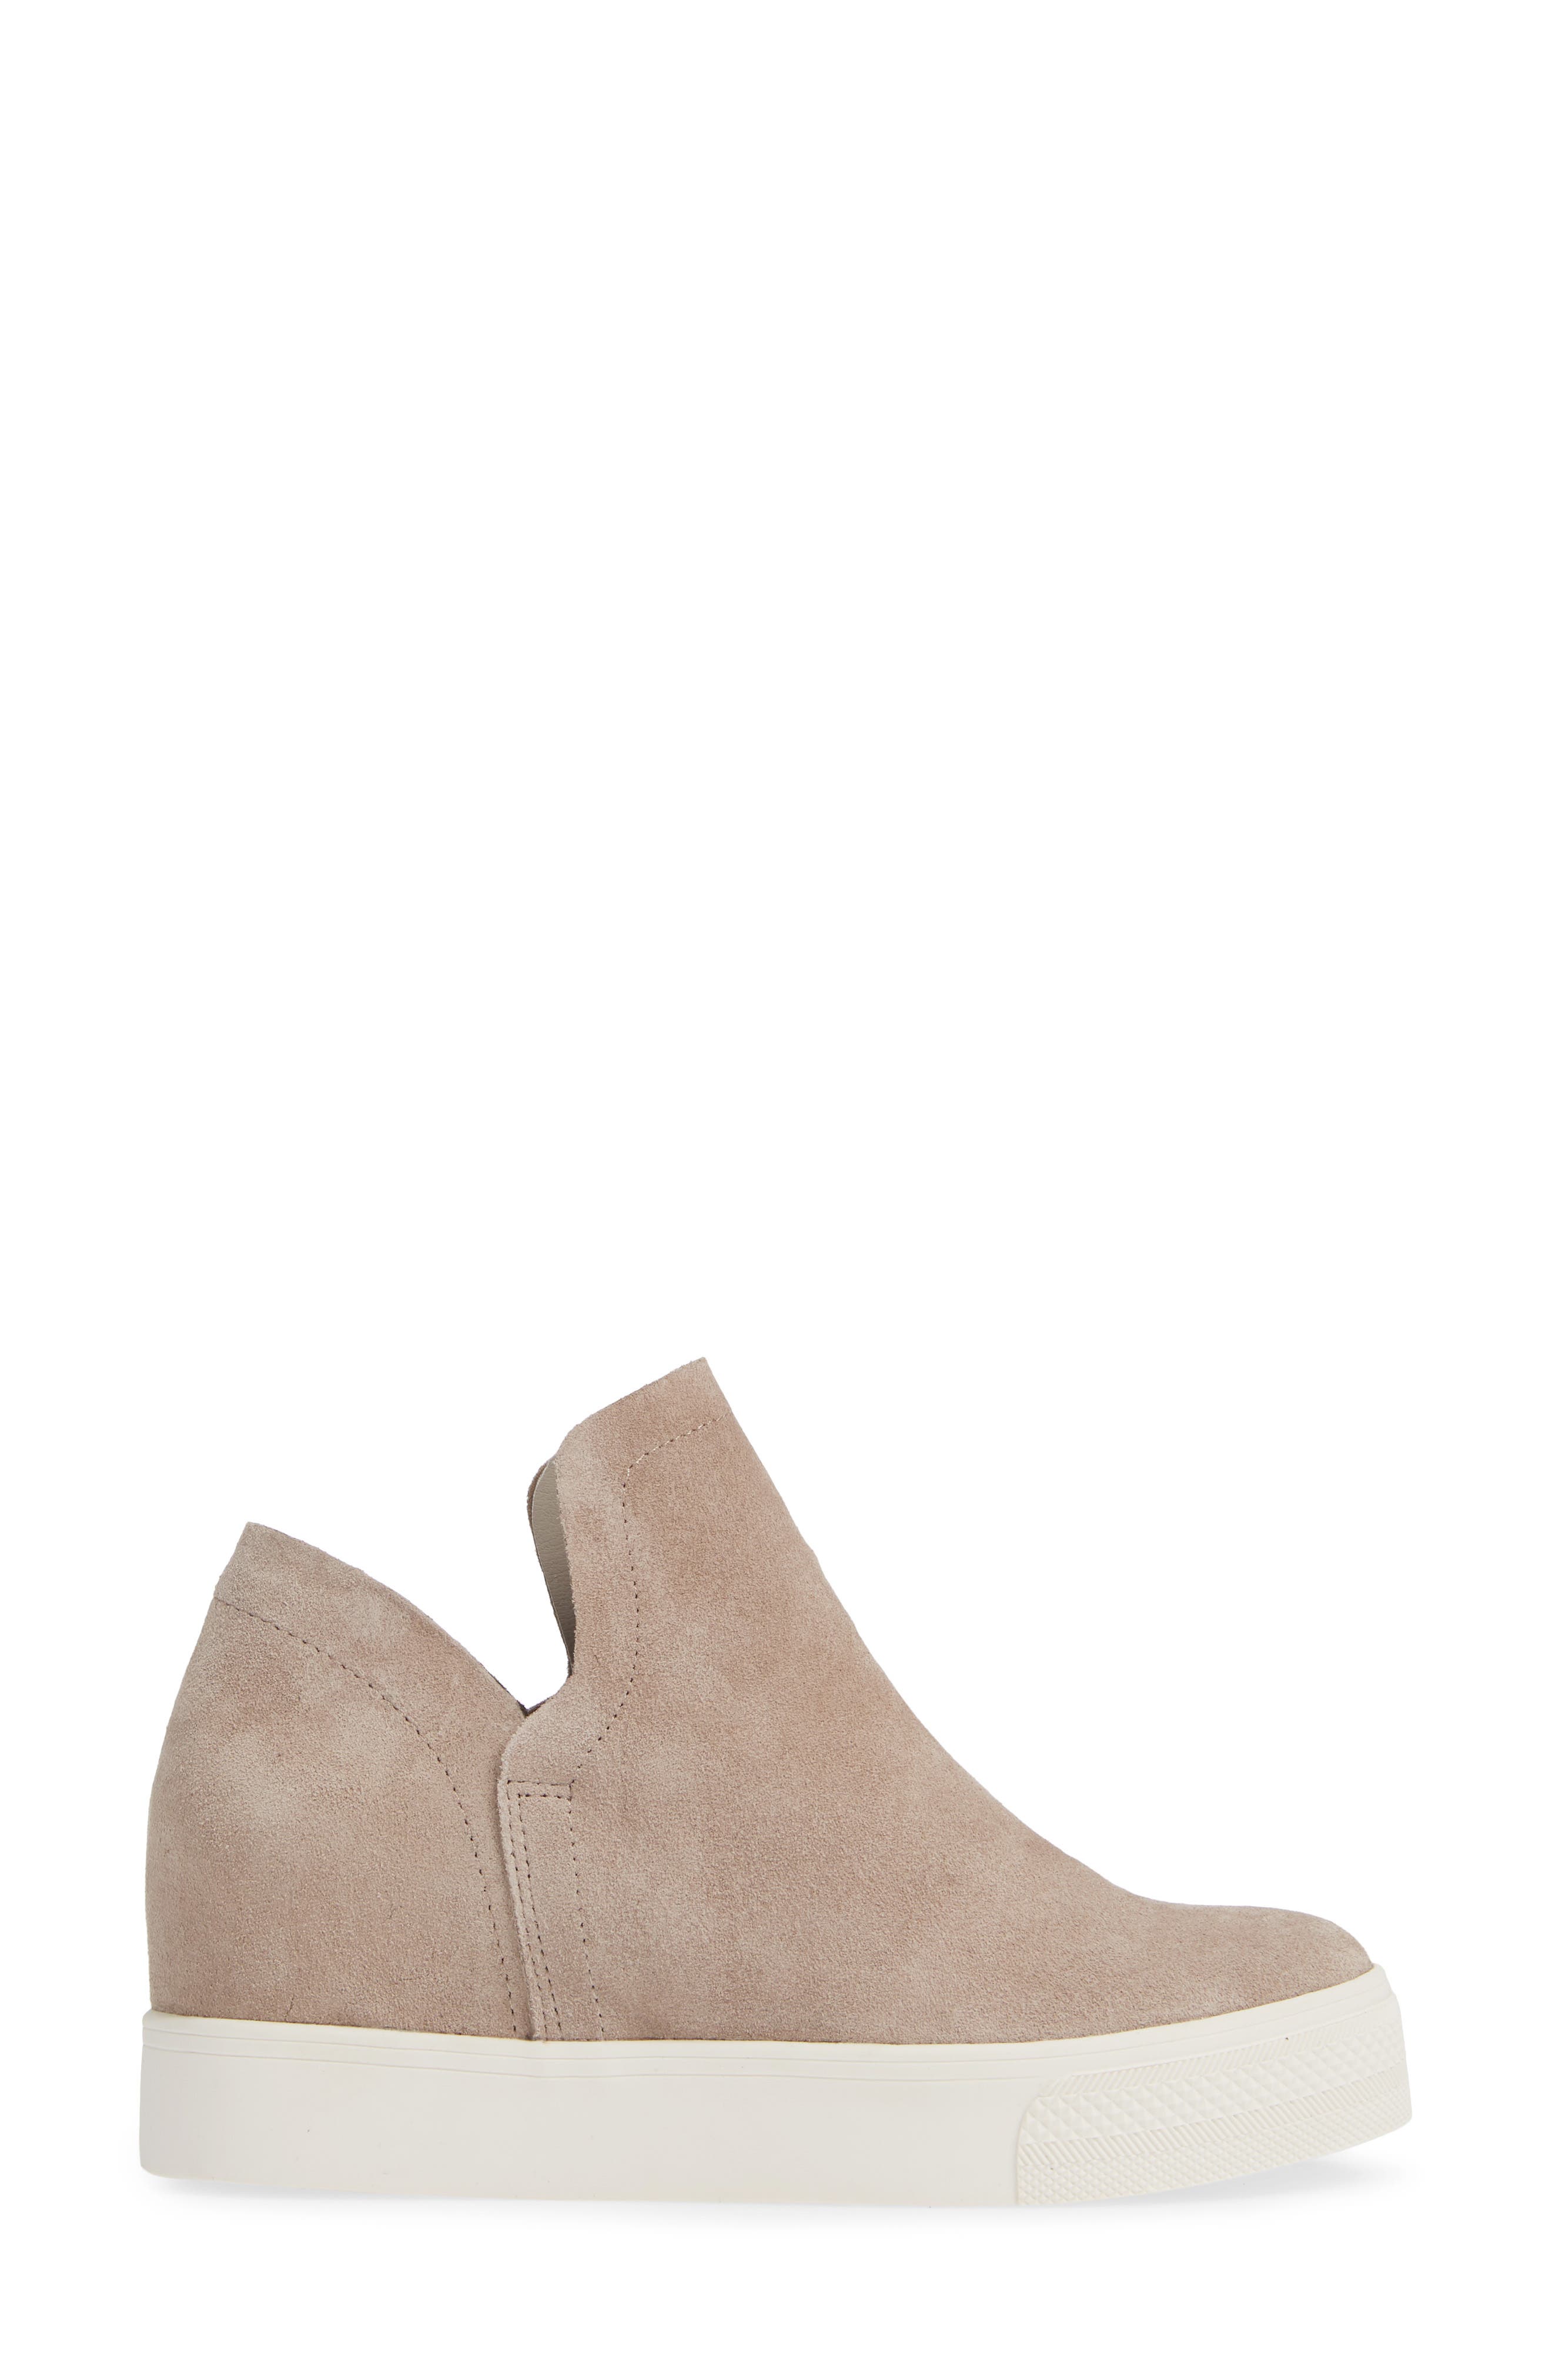 wrangle taupe suede